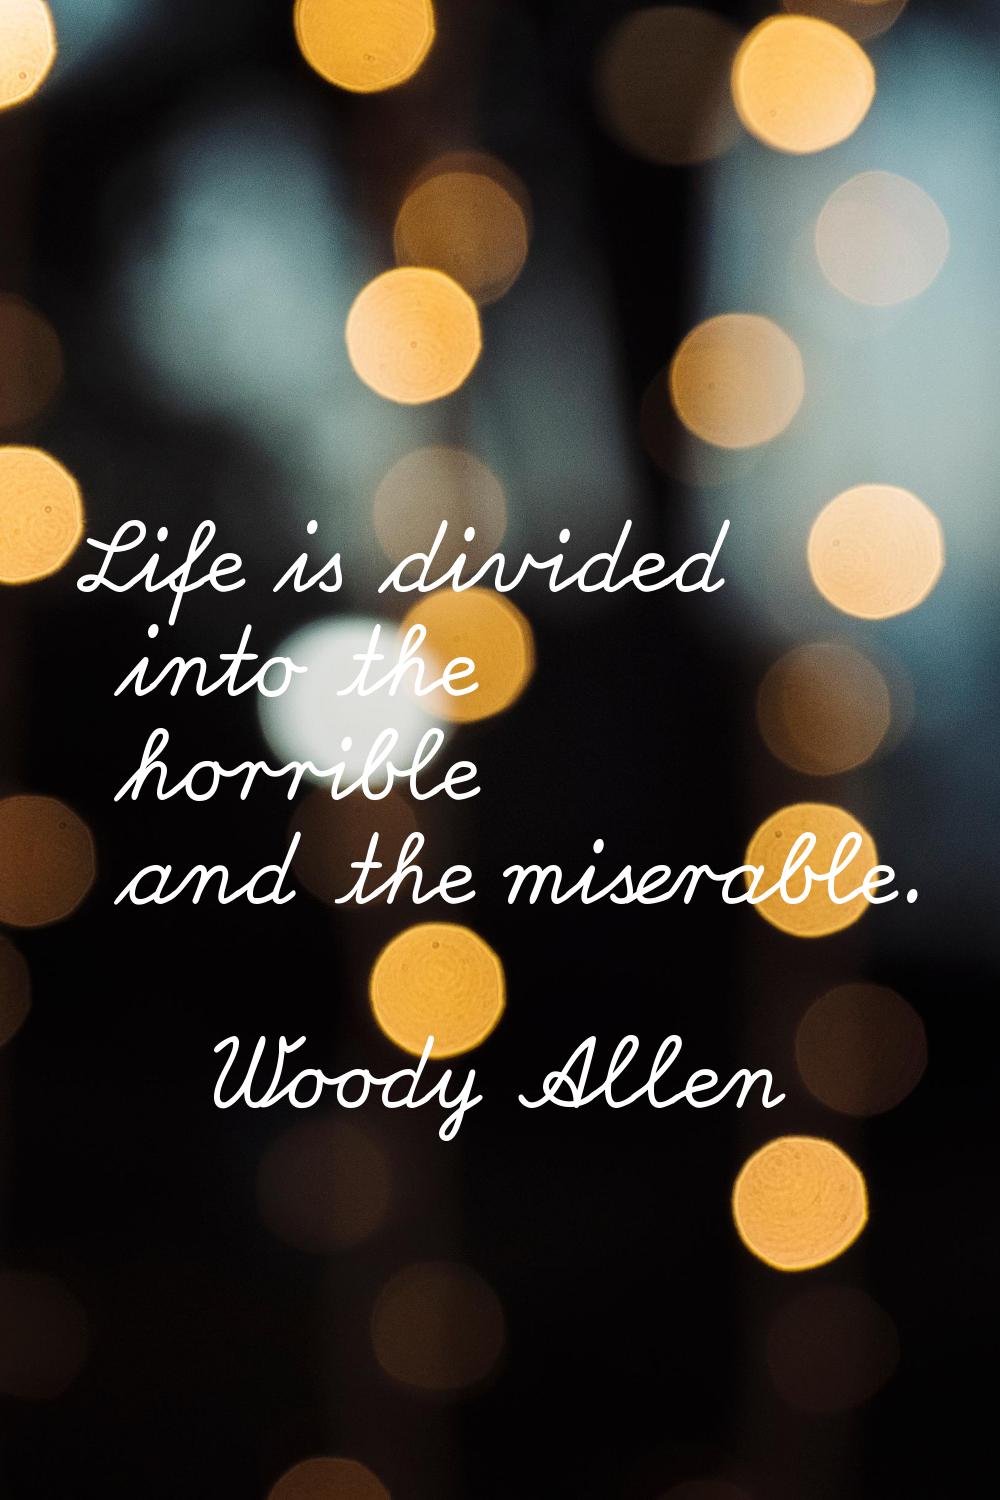 Life is divided into the horrible and the miserable.